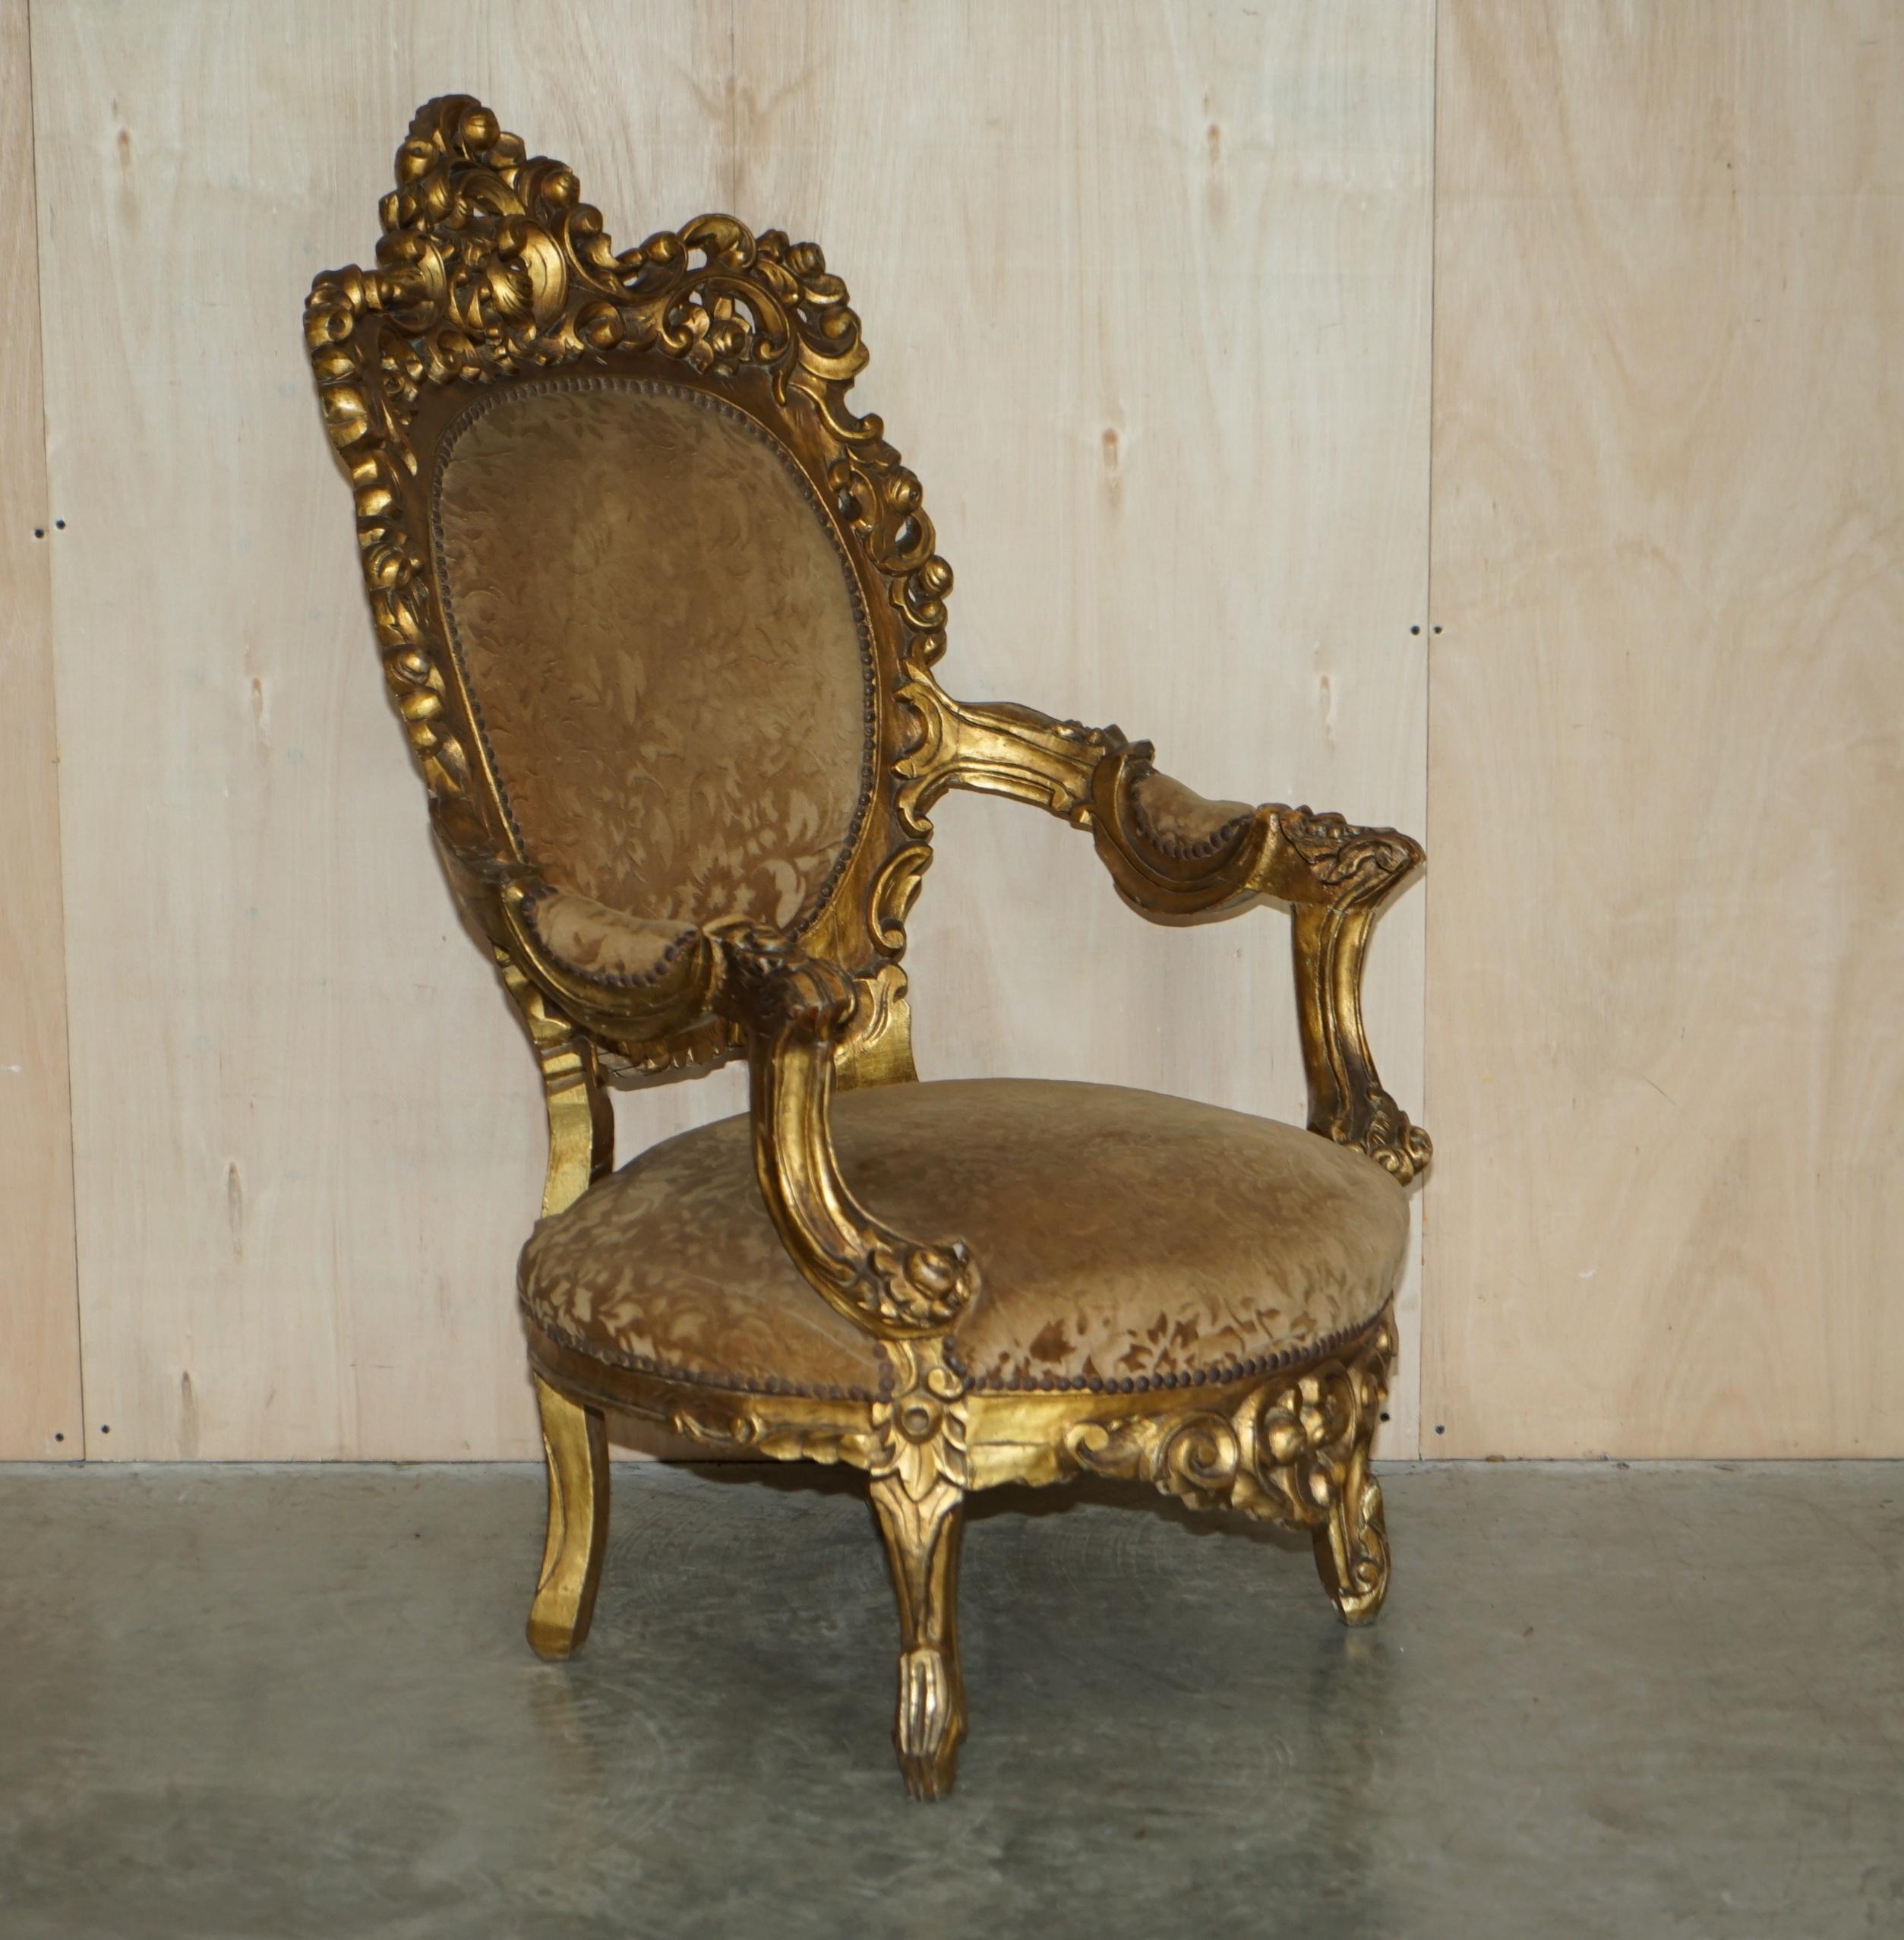 PAIR OF ANTIQUE ORIGINAL GiLTWOOD FINISH FRENCH LOUIS XV FAUTEUILS ARMCHAIRS For Sale 11